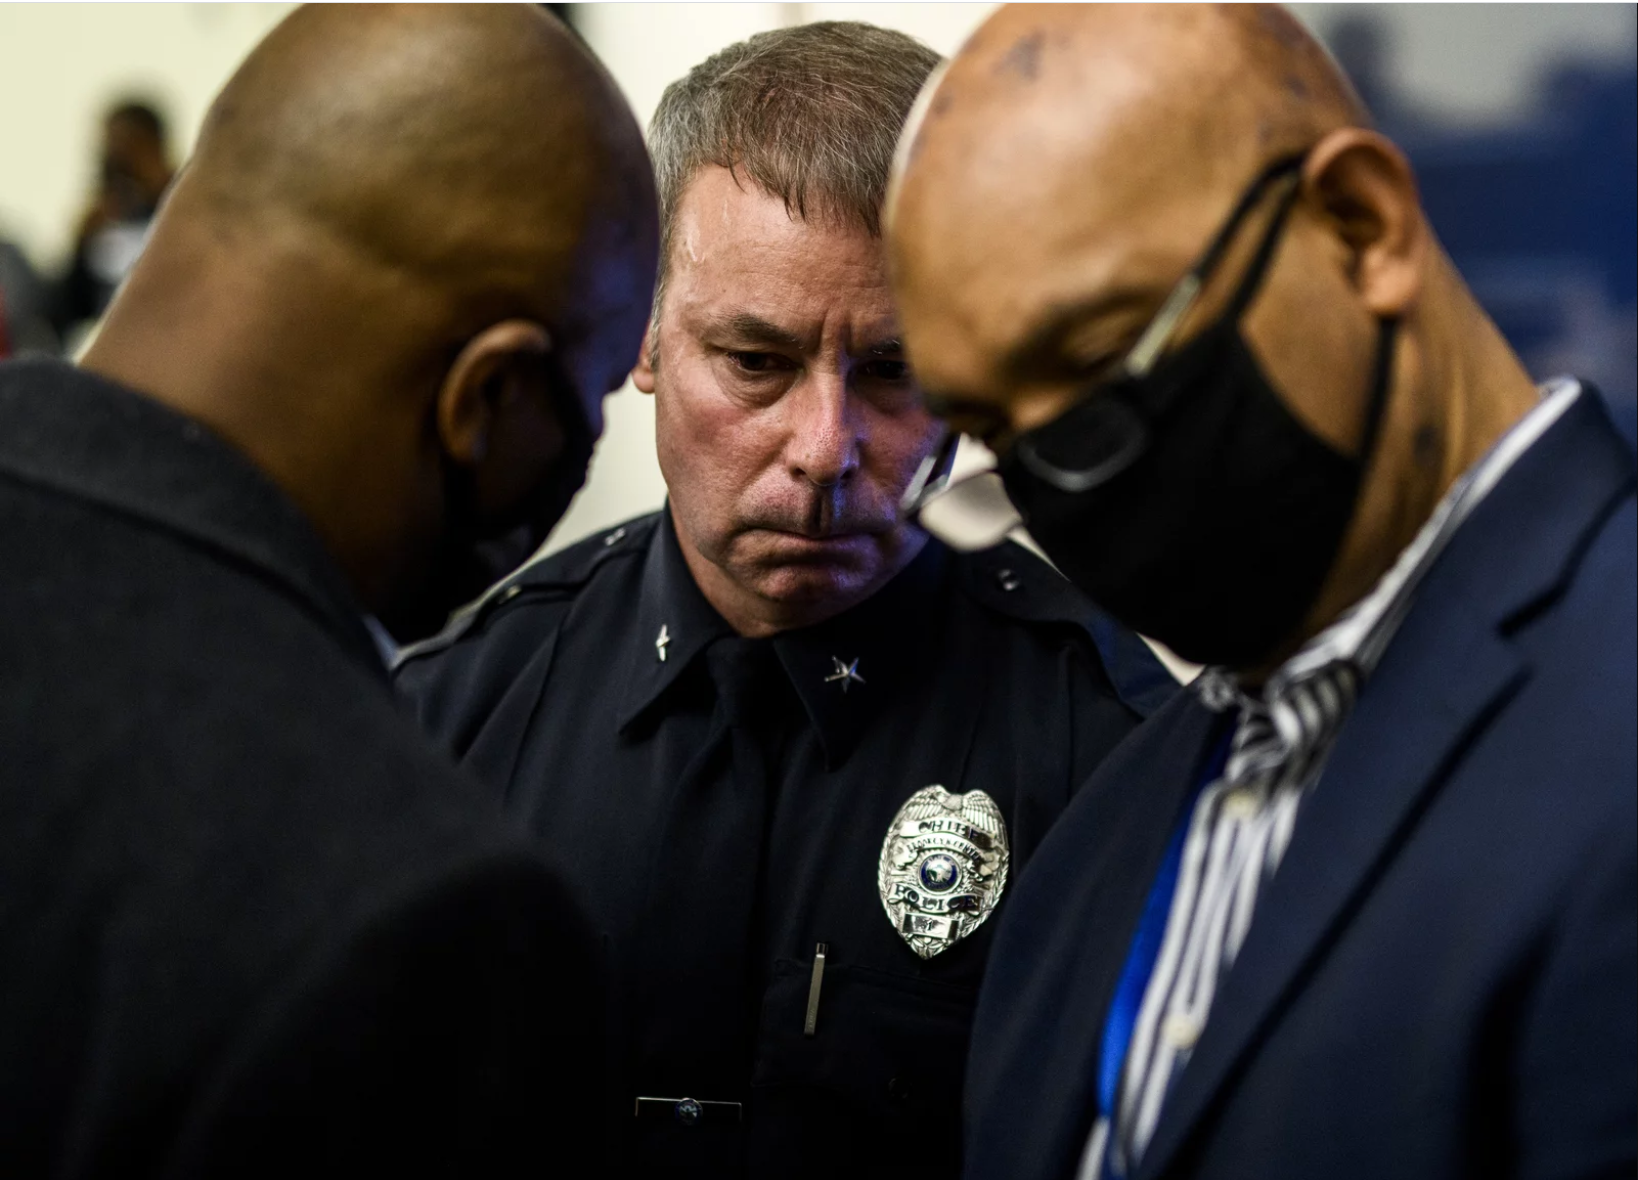 Brooklyn Center Police Chief Tim Gannon, at Monday's press conference regarding the killing of Daunte Wright. He, along with Kim Potter, who shot Daunte Wright, resigned Tuesday. Stephen Maturen/Getty Images